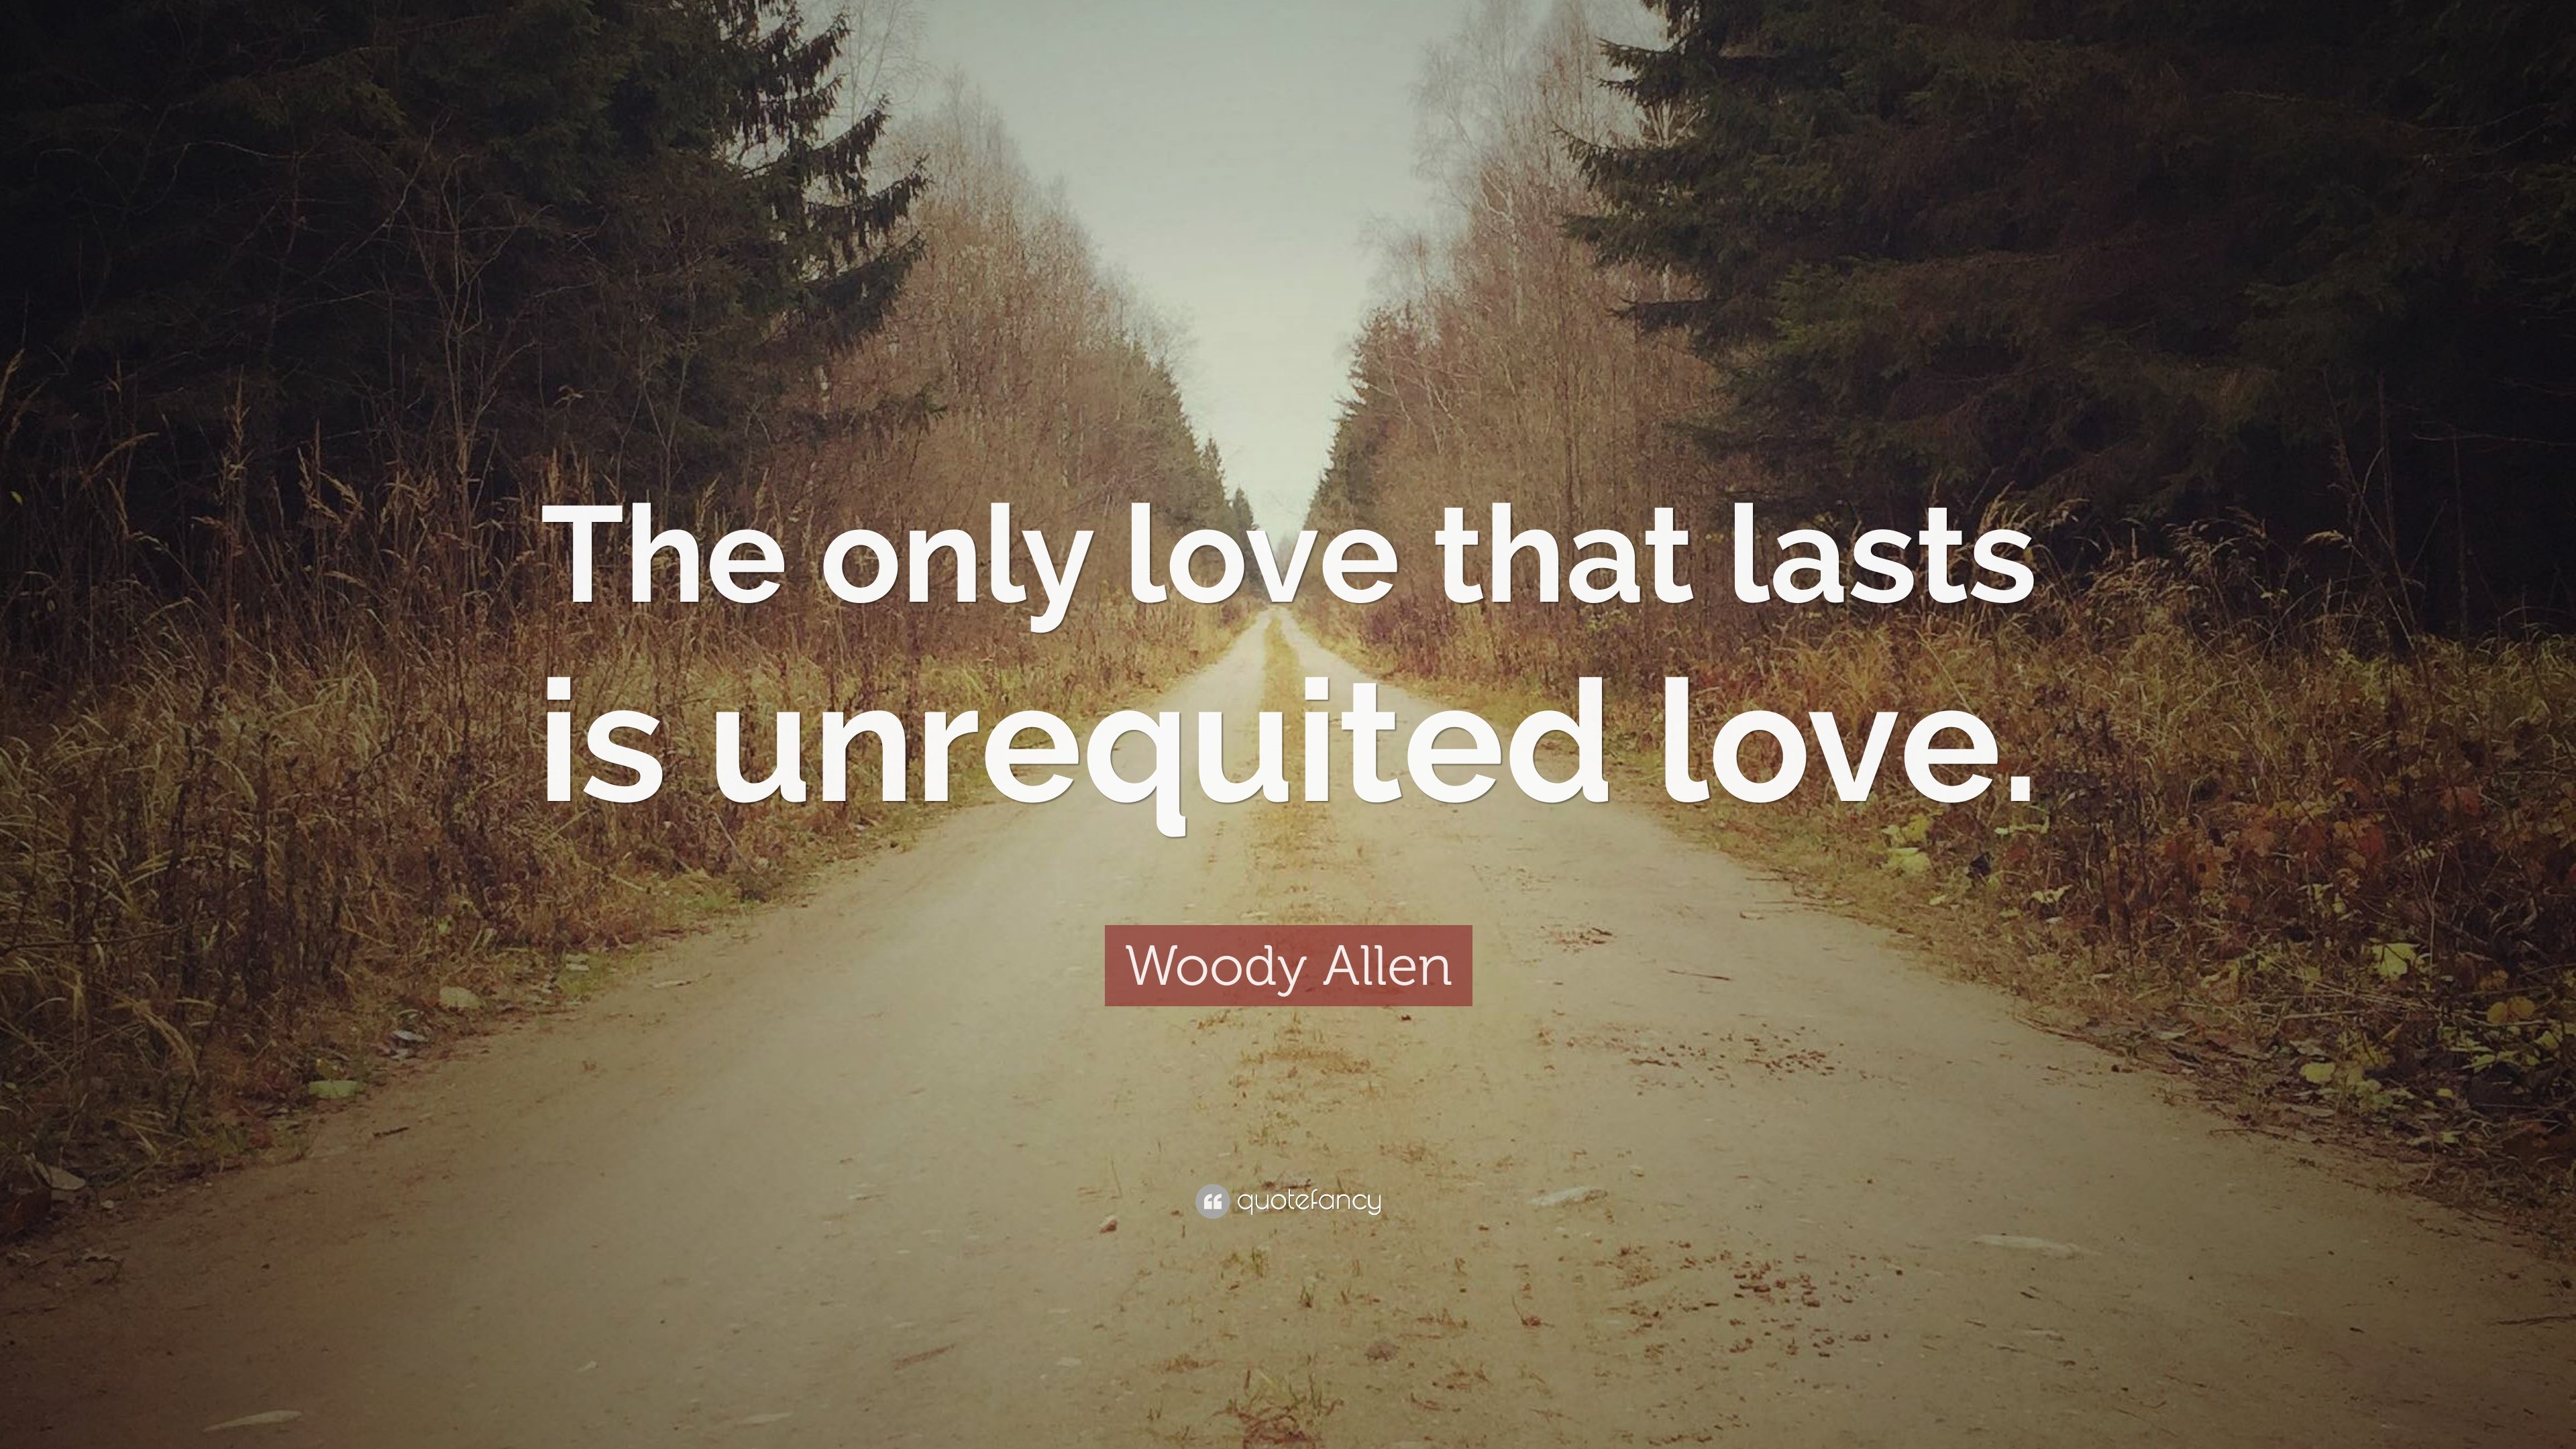 Woody Allen Quote: “The only love that lasts is unrequited